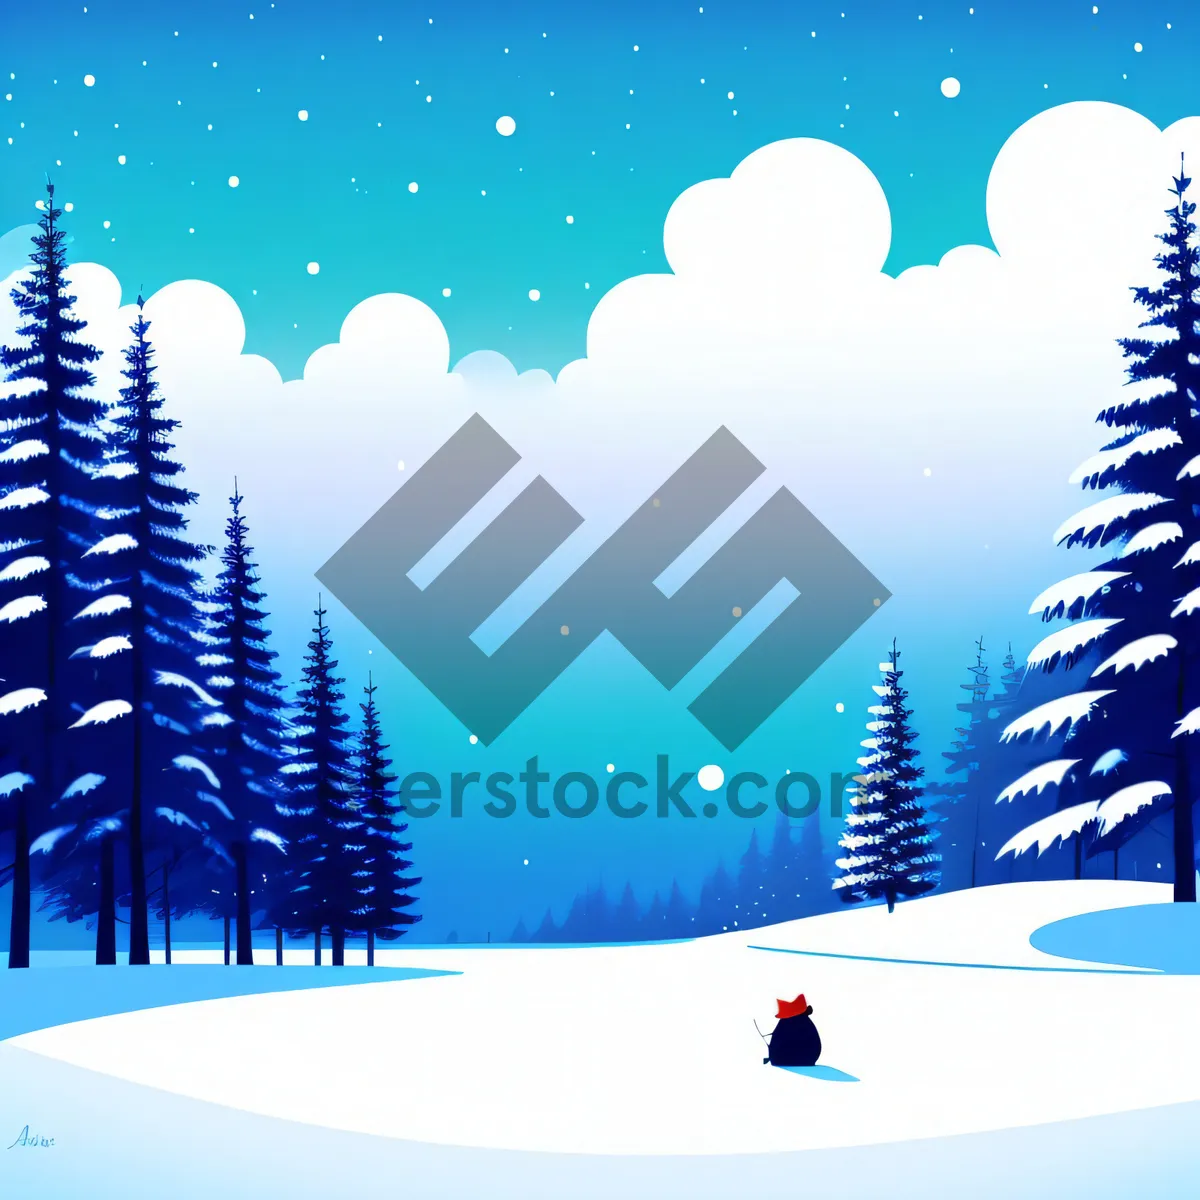 Picture of Winter Wonderland: Festive Fir Tree with Snowflake Decor